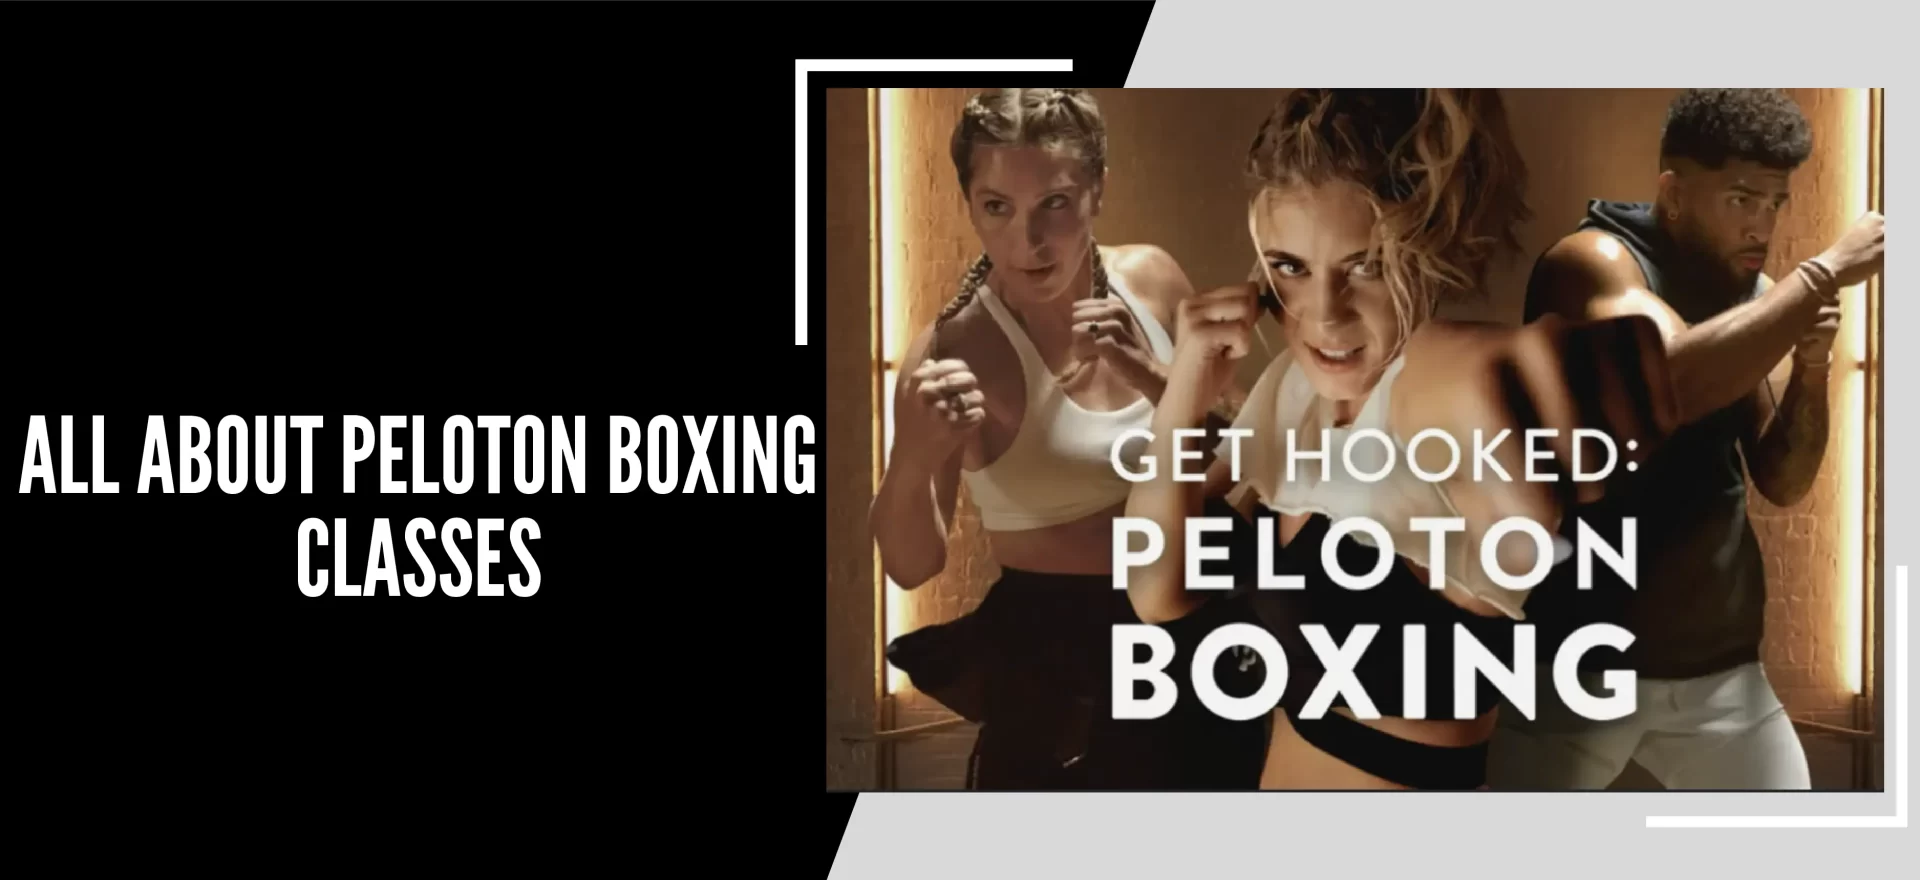 All About Peloton Boxing Classes